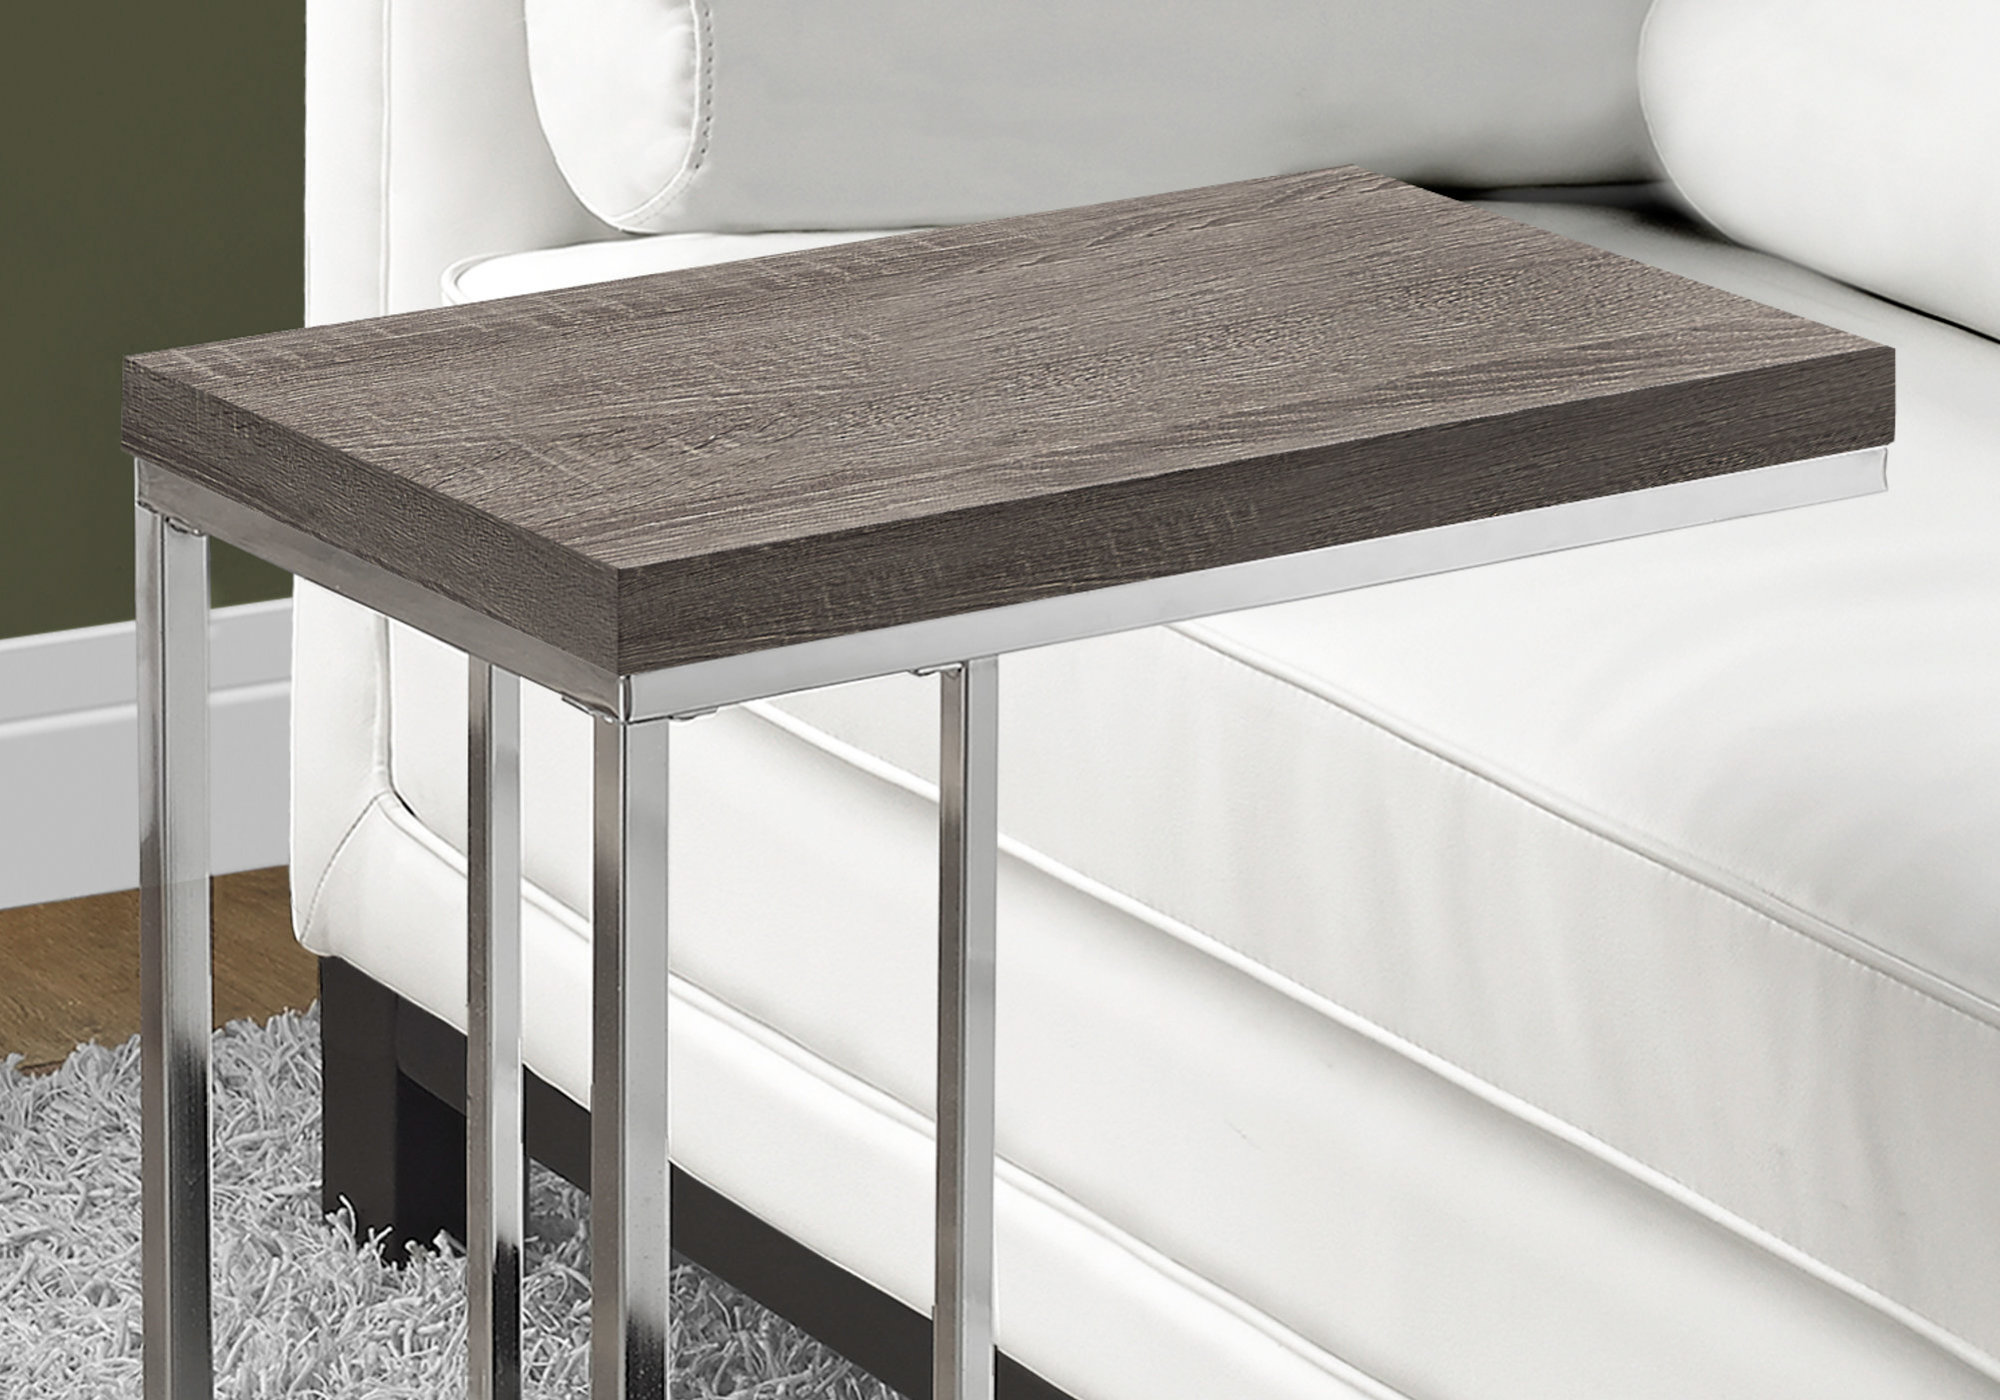 ACCENT TABLE  - DARK TAUPE WITH CHROME METAL